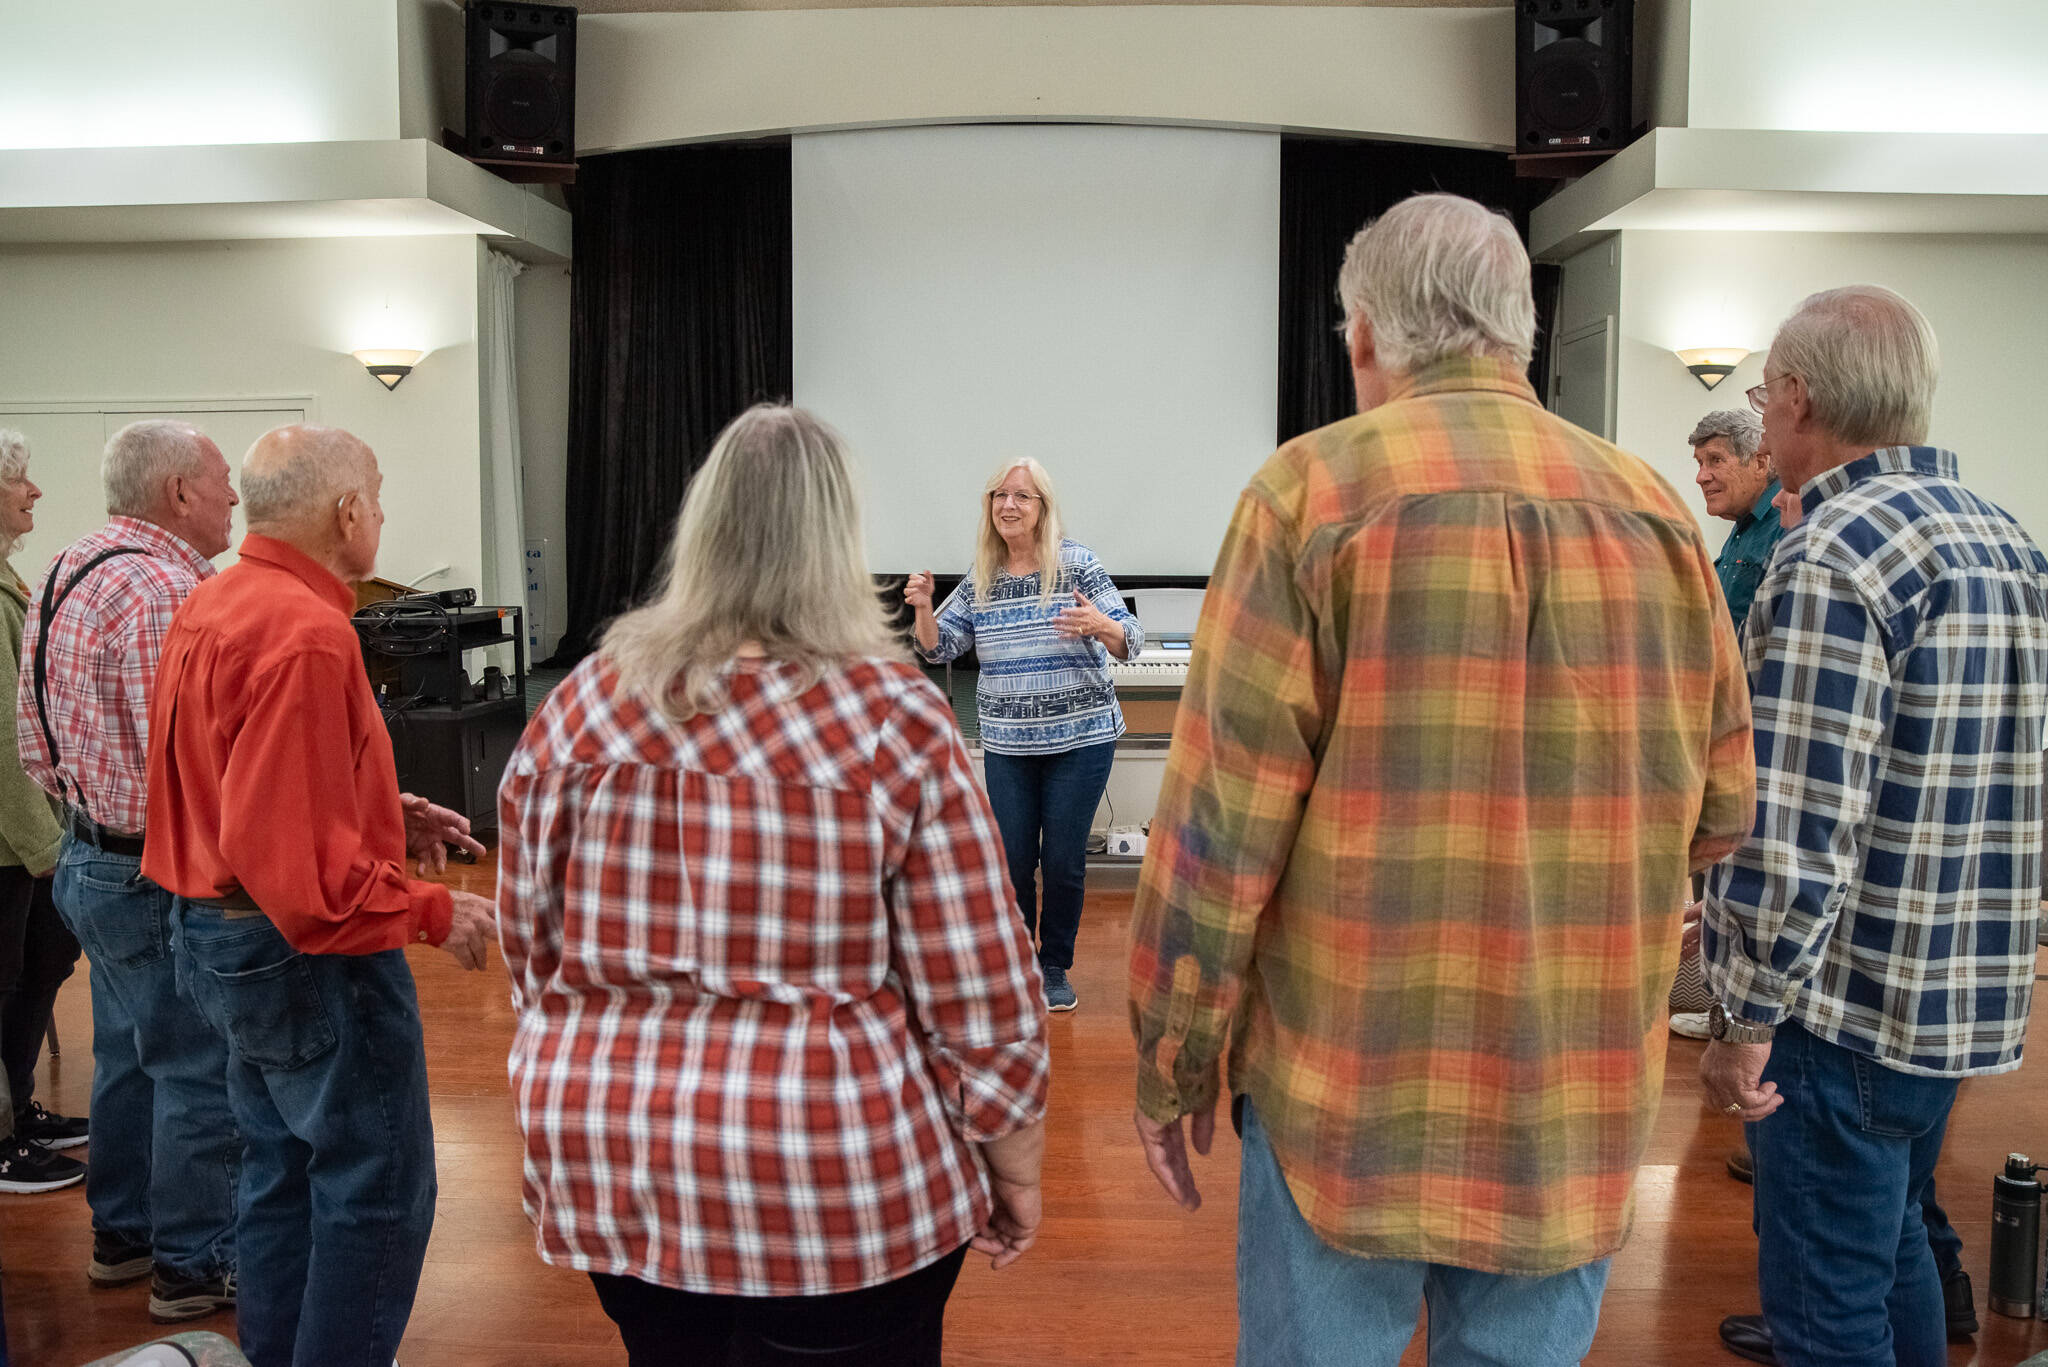 Sequim Gazette photo by Emily Matthiessen / Director Linda Muldowney leads the Juan de Fuca Harmony chorus in song as they prepare for their 40th anniversary concert. Muldowney has been directing the chorus since 2018.